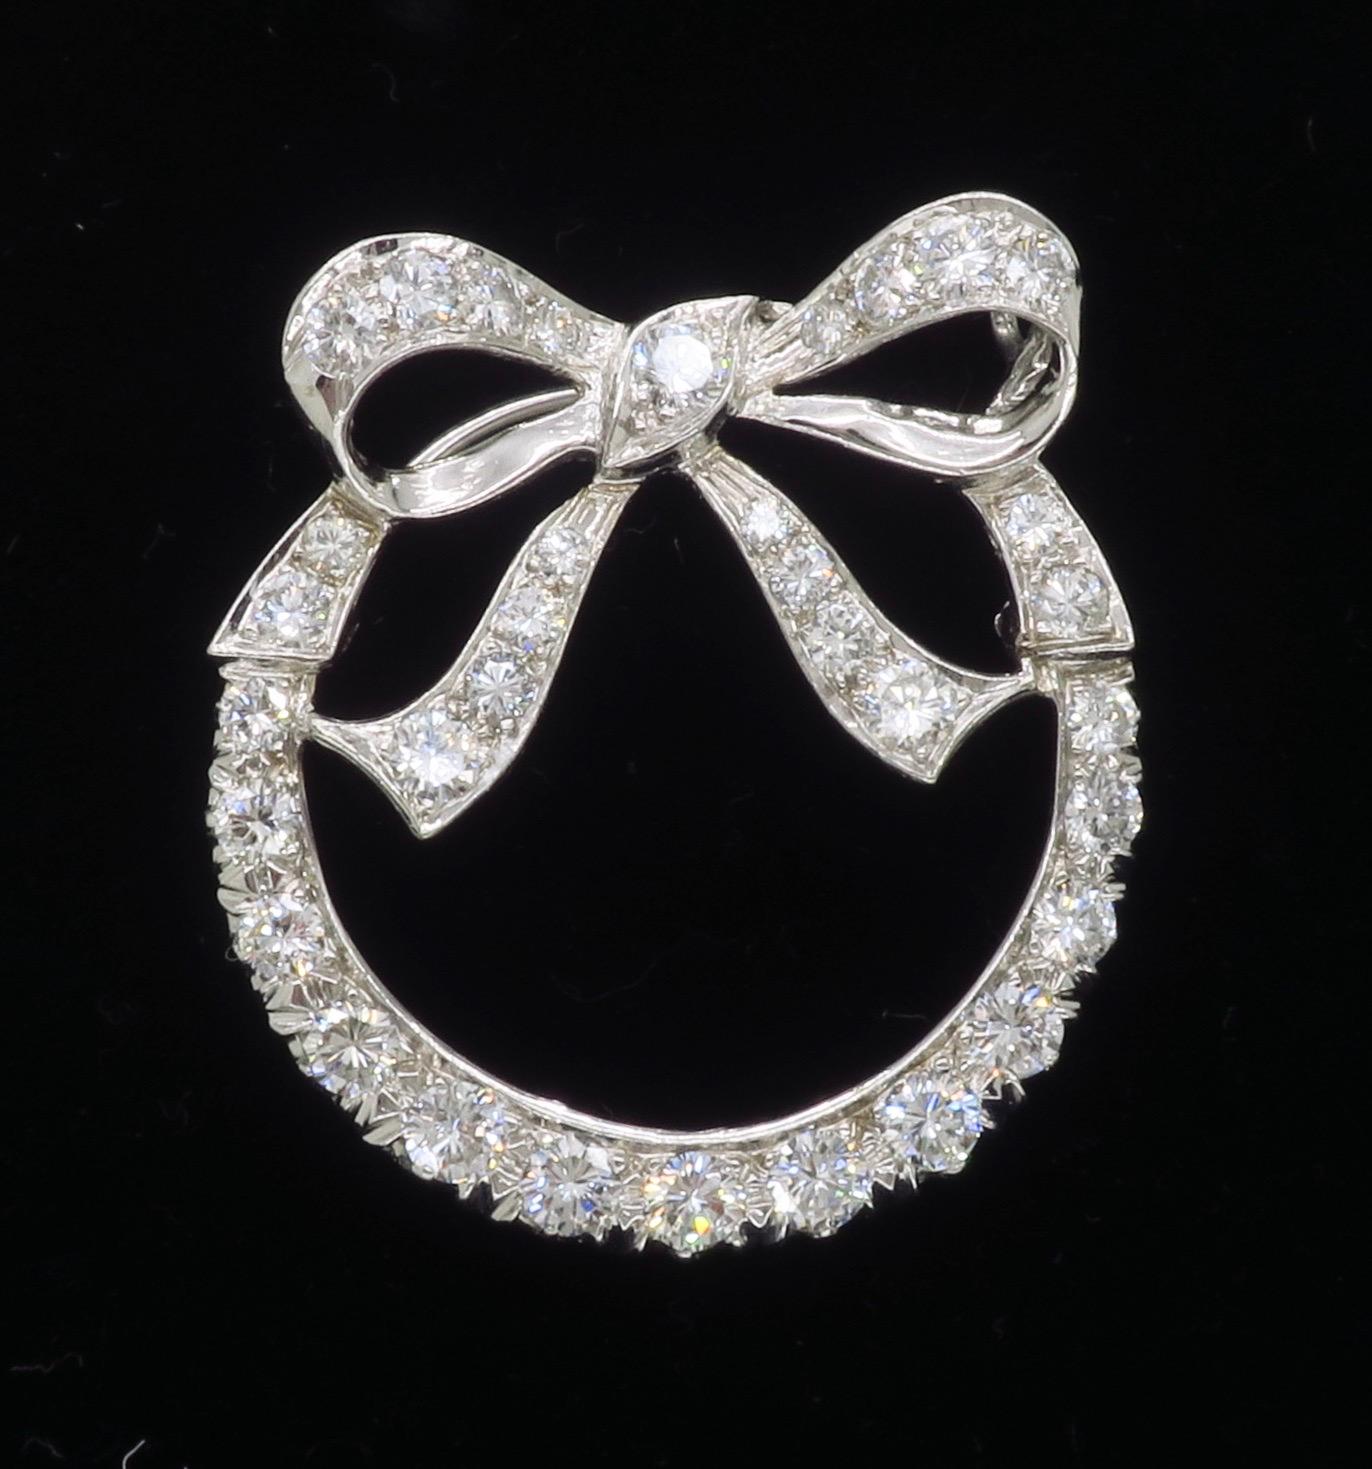 Vintage bow diamond brooch crafted in 14k white gold.

Diamond Carat Weight: Approximately 1.95CTW
Diamond Cut: Round Brilliant Cut Diamonds
Color: Average E-F
Clarity: Average VS
Metal: 14k White Gold 
Weight: 5.8 Grams
Length: Approximately 1